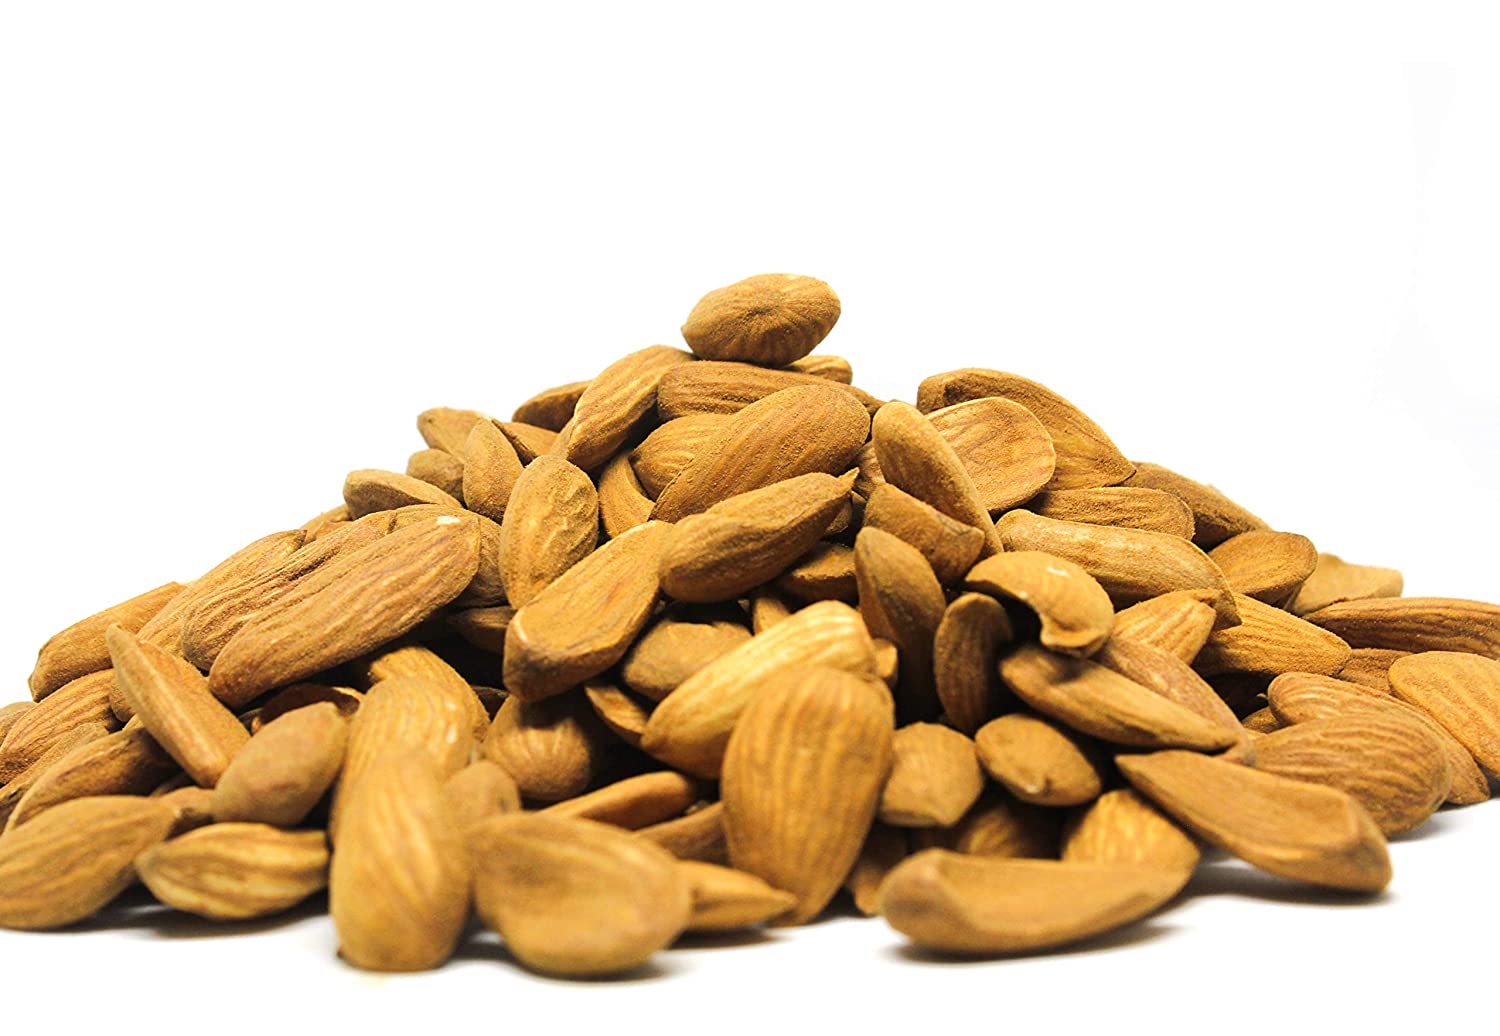 Iranian Almond Market | Wholesale for Export & Import